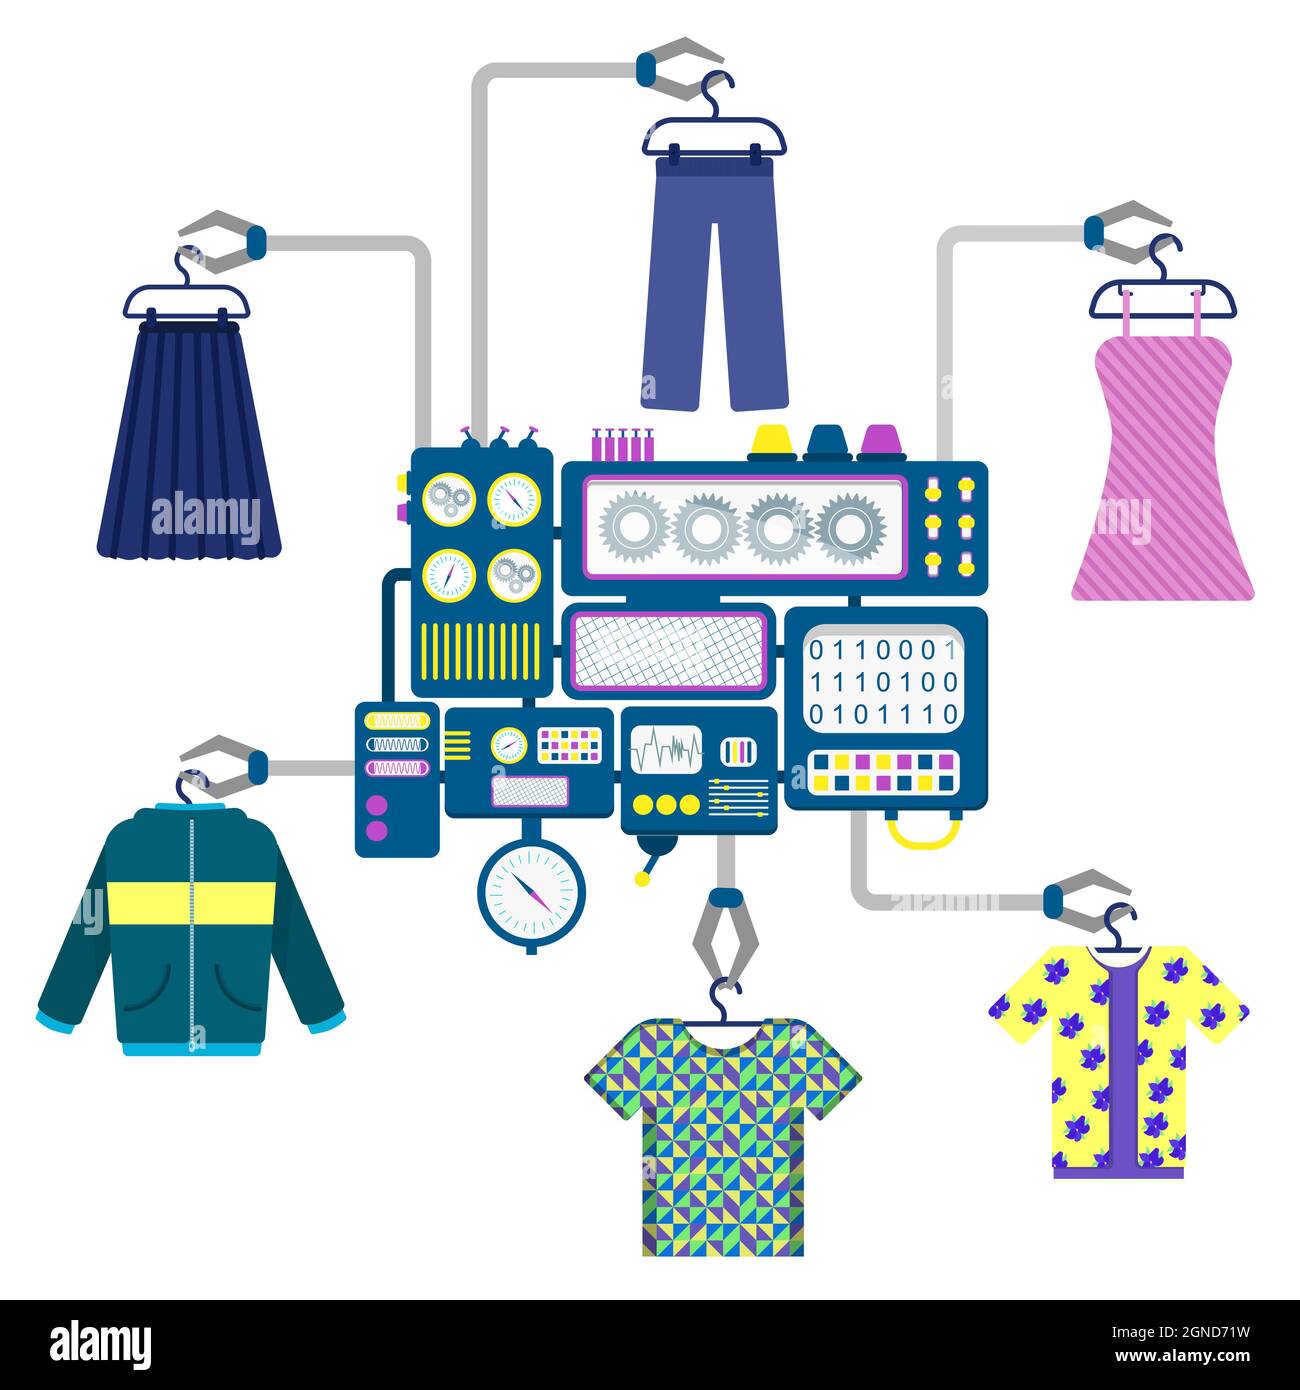 Machine with claws holding different pieces of clothing like t-shirts, shirts, dresses, skirts, jackets and pants. Stock Vector